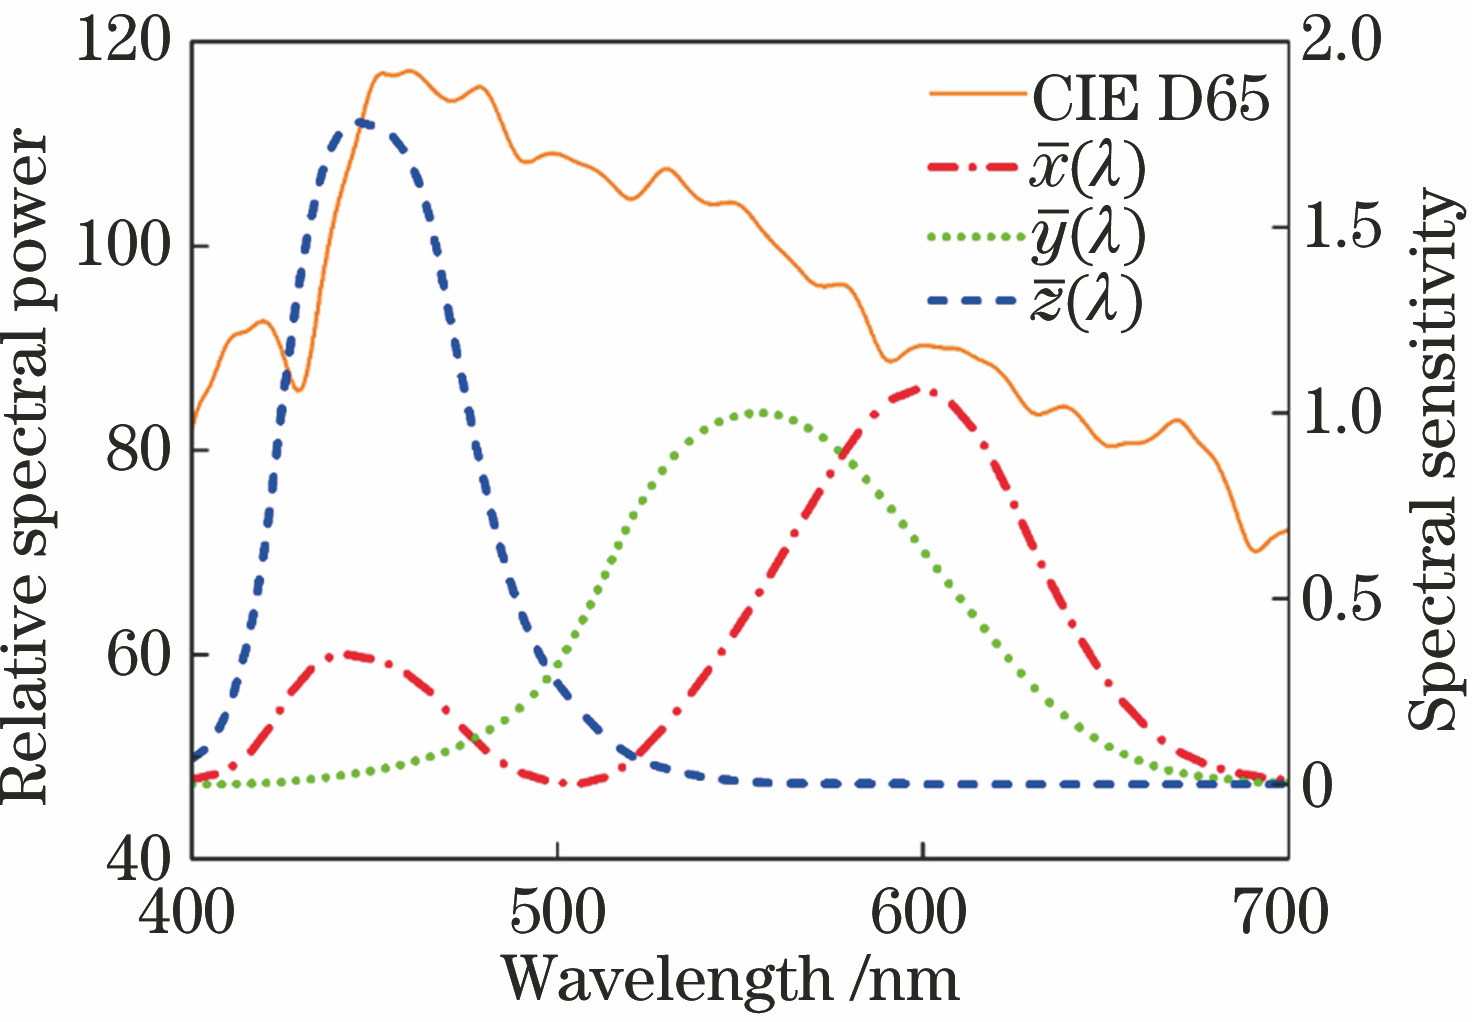 Spectral power distribution of CIE D65 light source and color matching function in CIEXYZ space